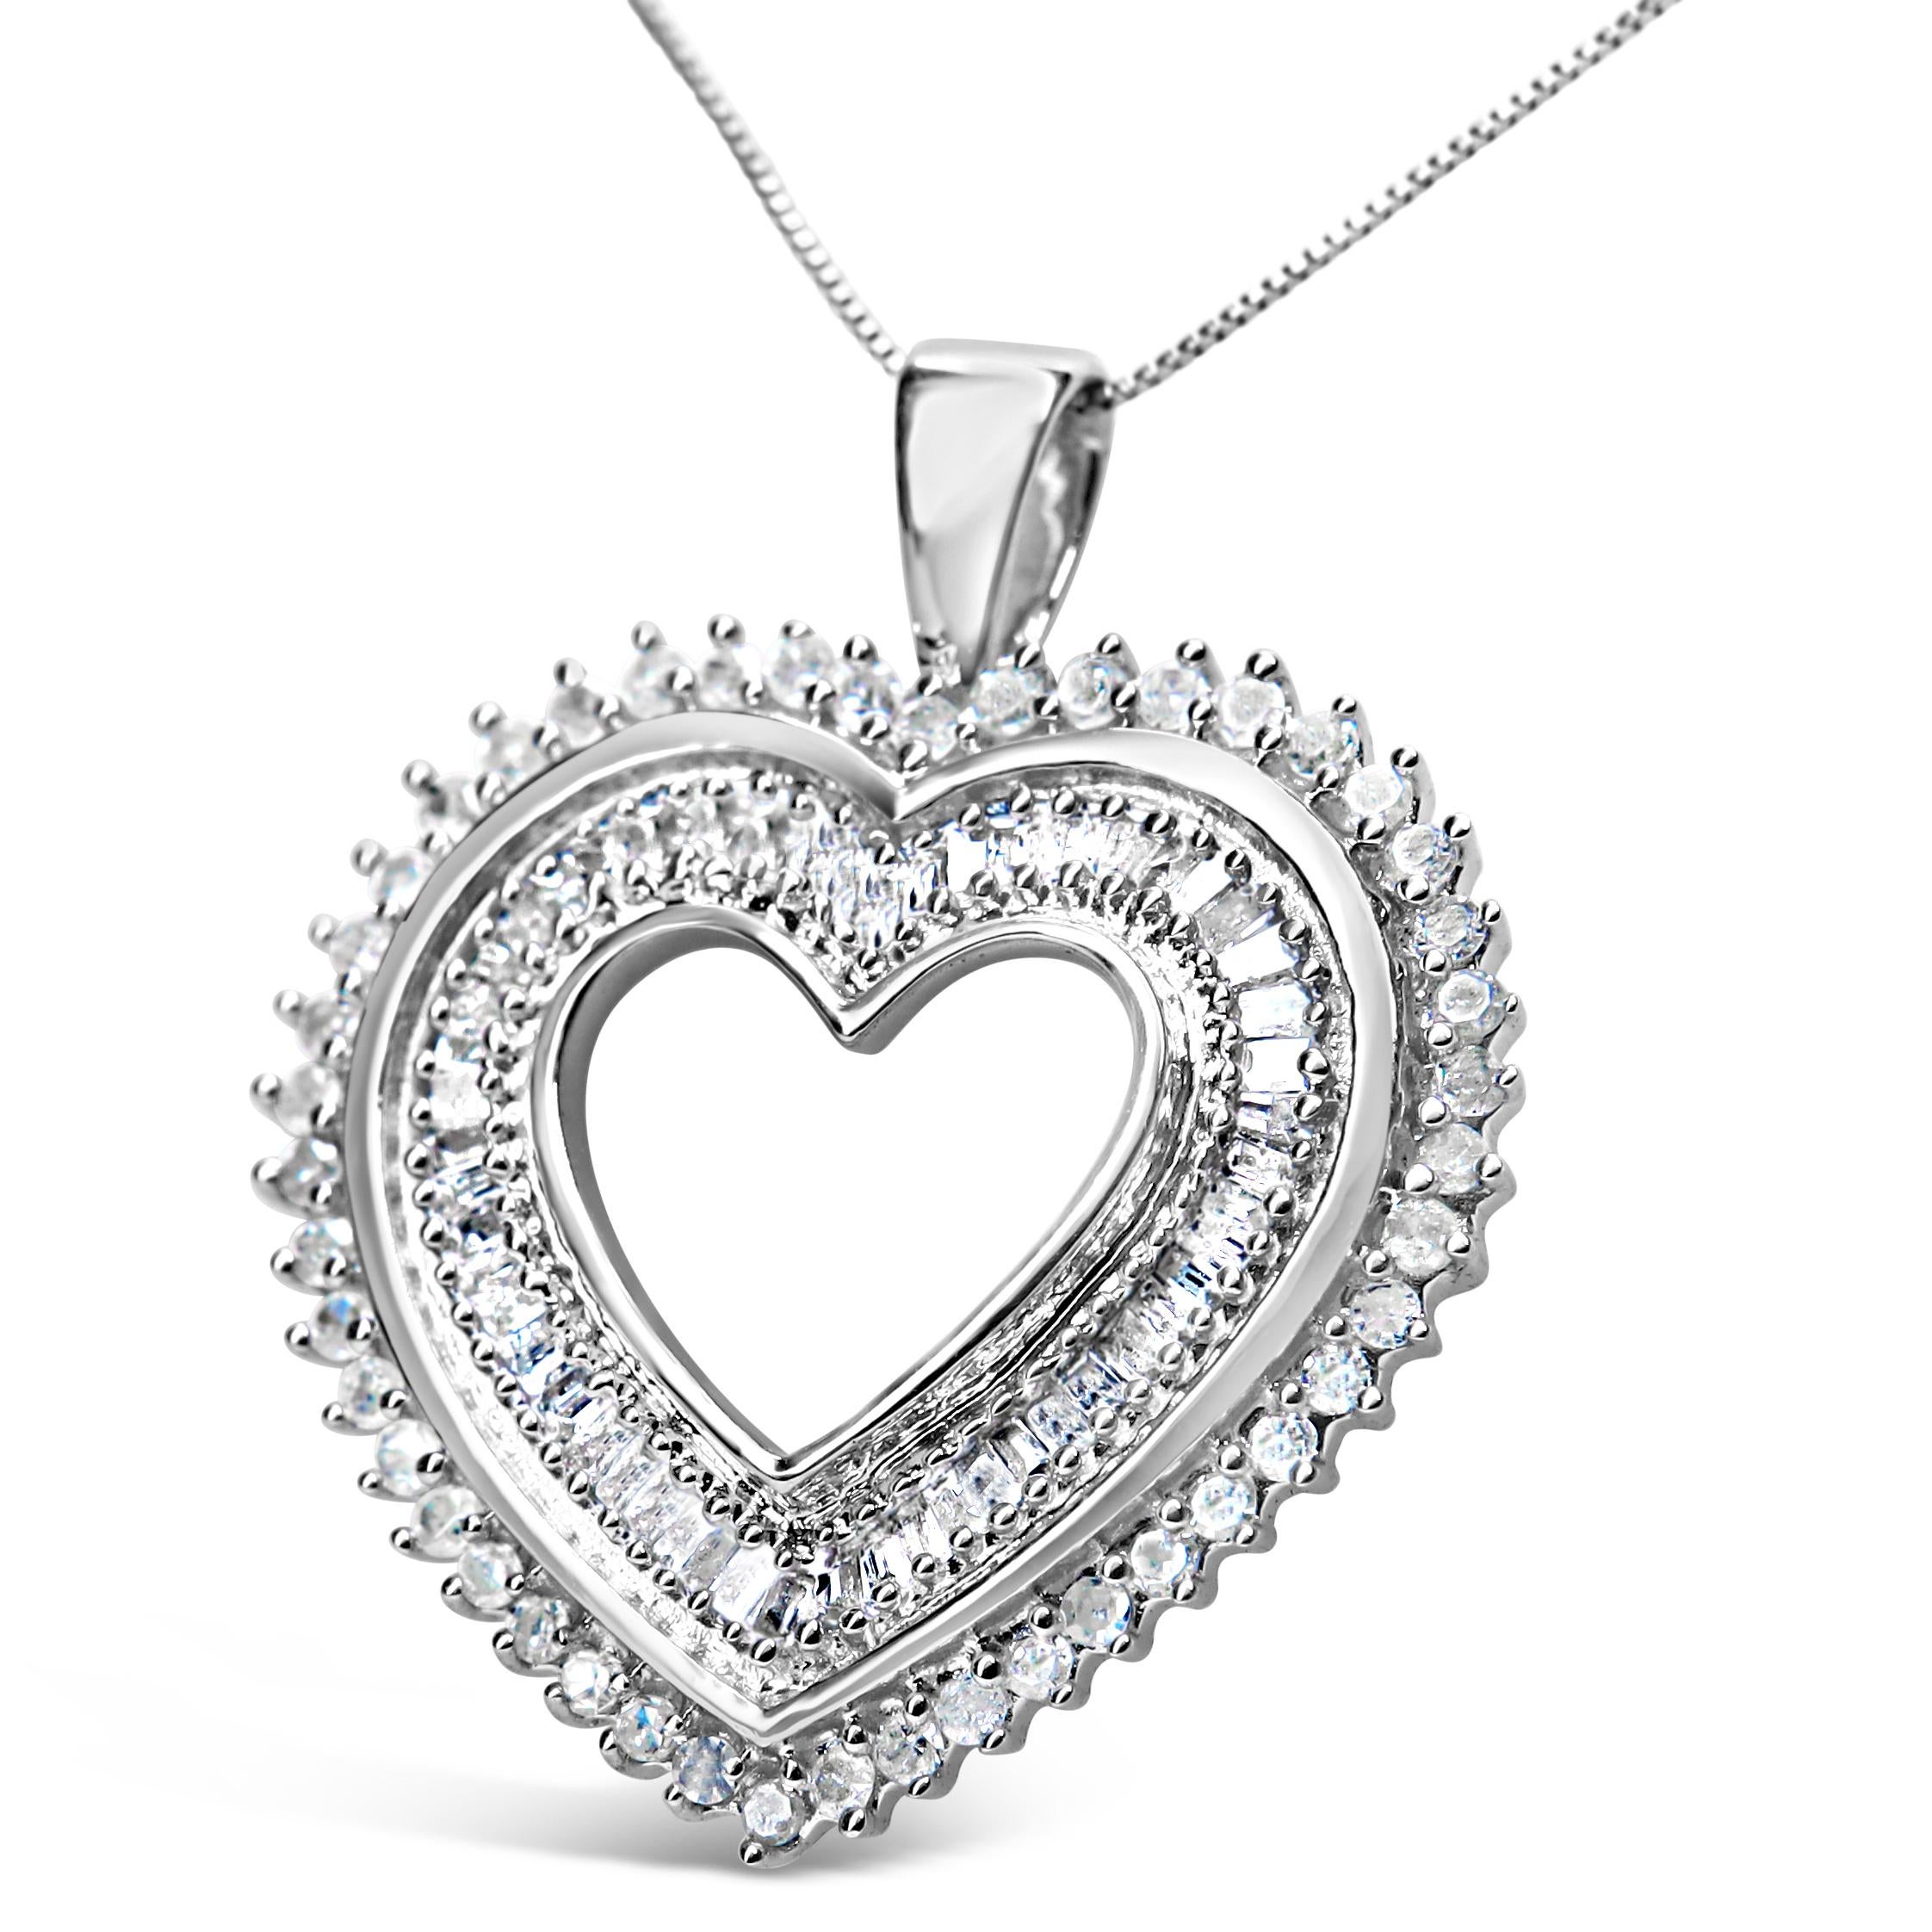 Sparkling with an impressive array of 1.0 cttw diamonds, this open heart pendant necklace for her is a beautiful illustration of love and romance. The interior of the heart is intricately lined by glittering baguette diamonds in a channel-setting,